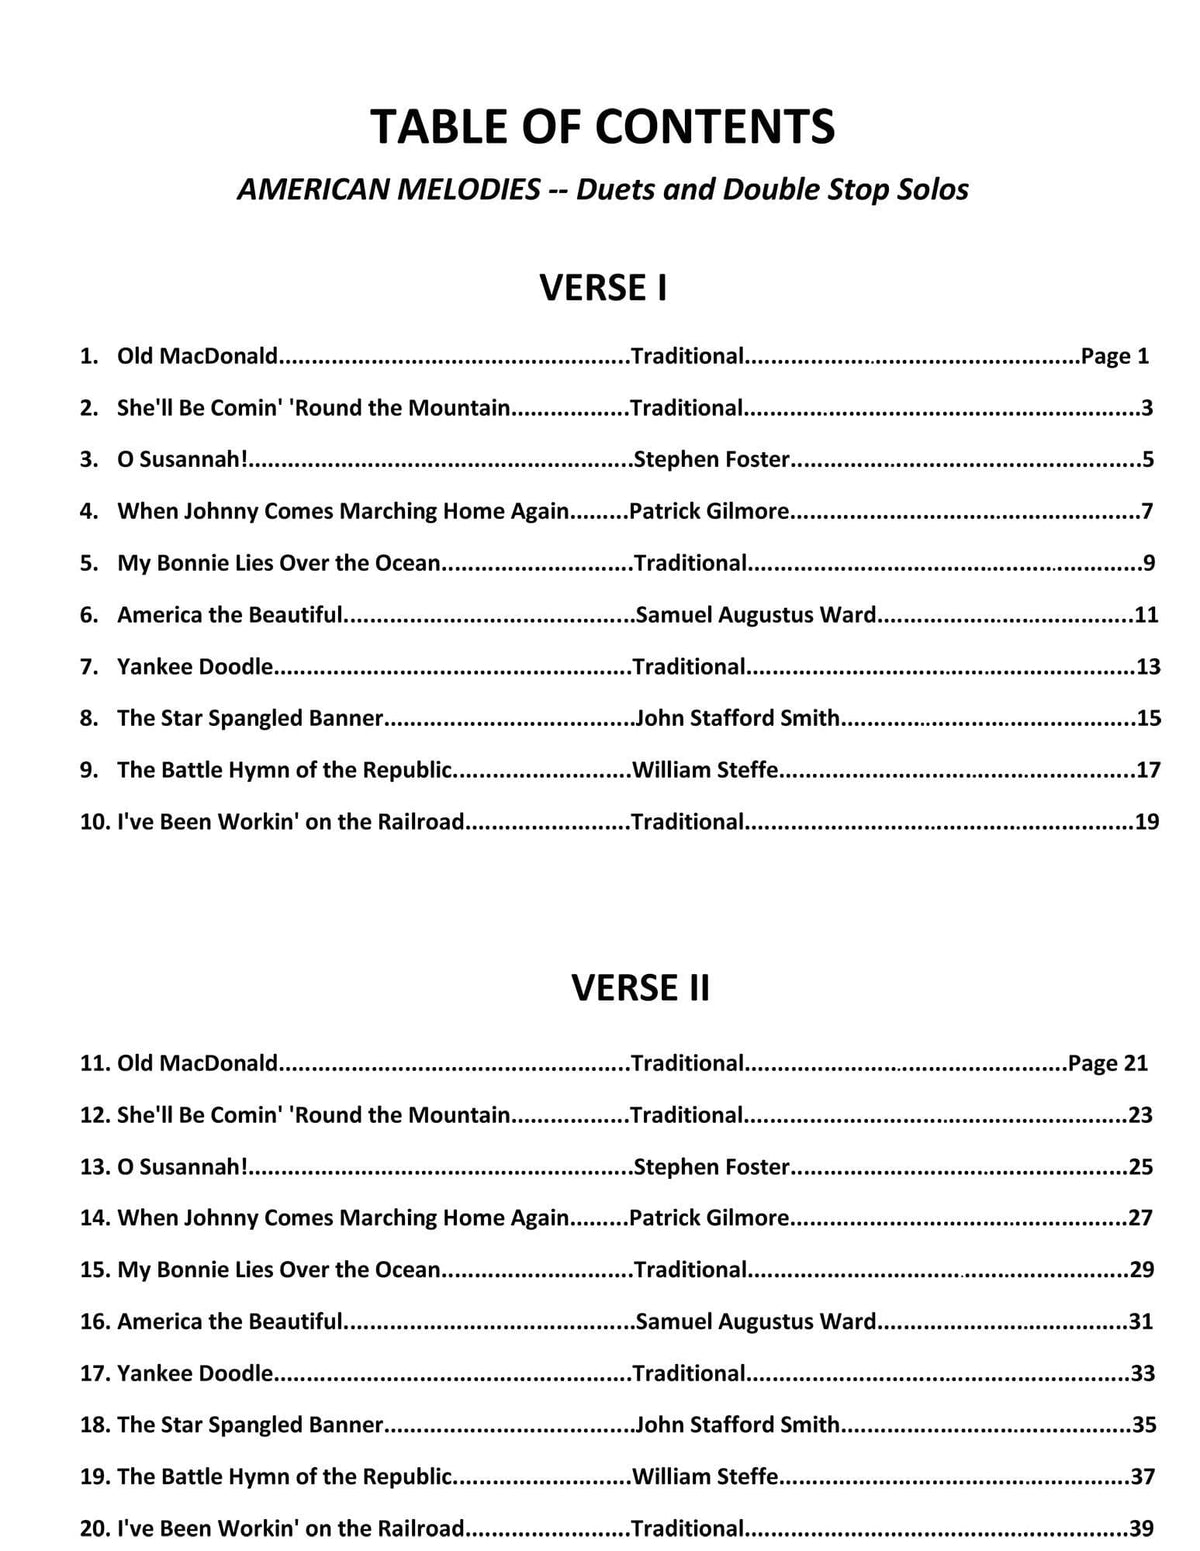 Yasuda, Martha - American Melodies: Double Stop Solos and Duets for Cello, Volume I - Digital Download